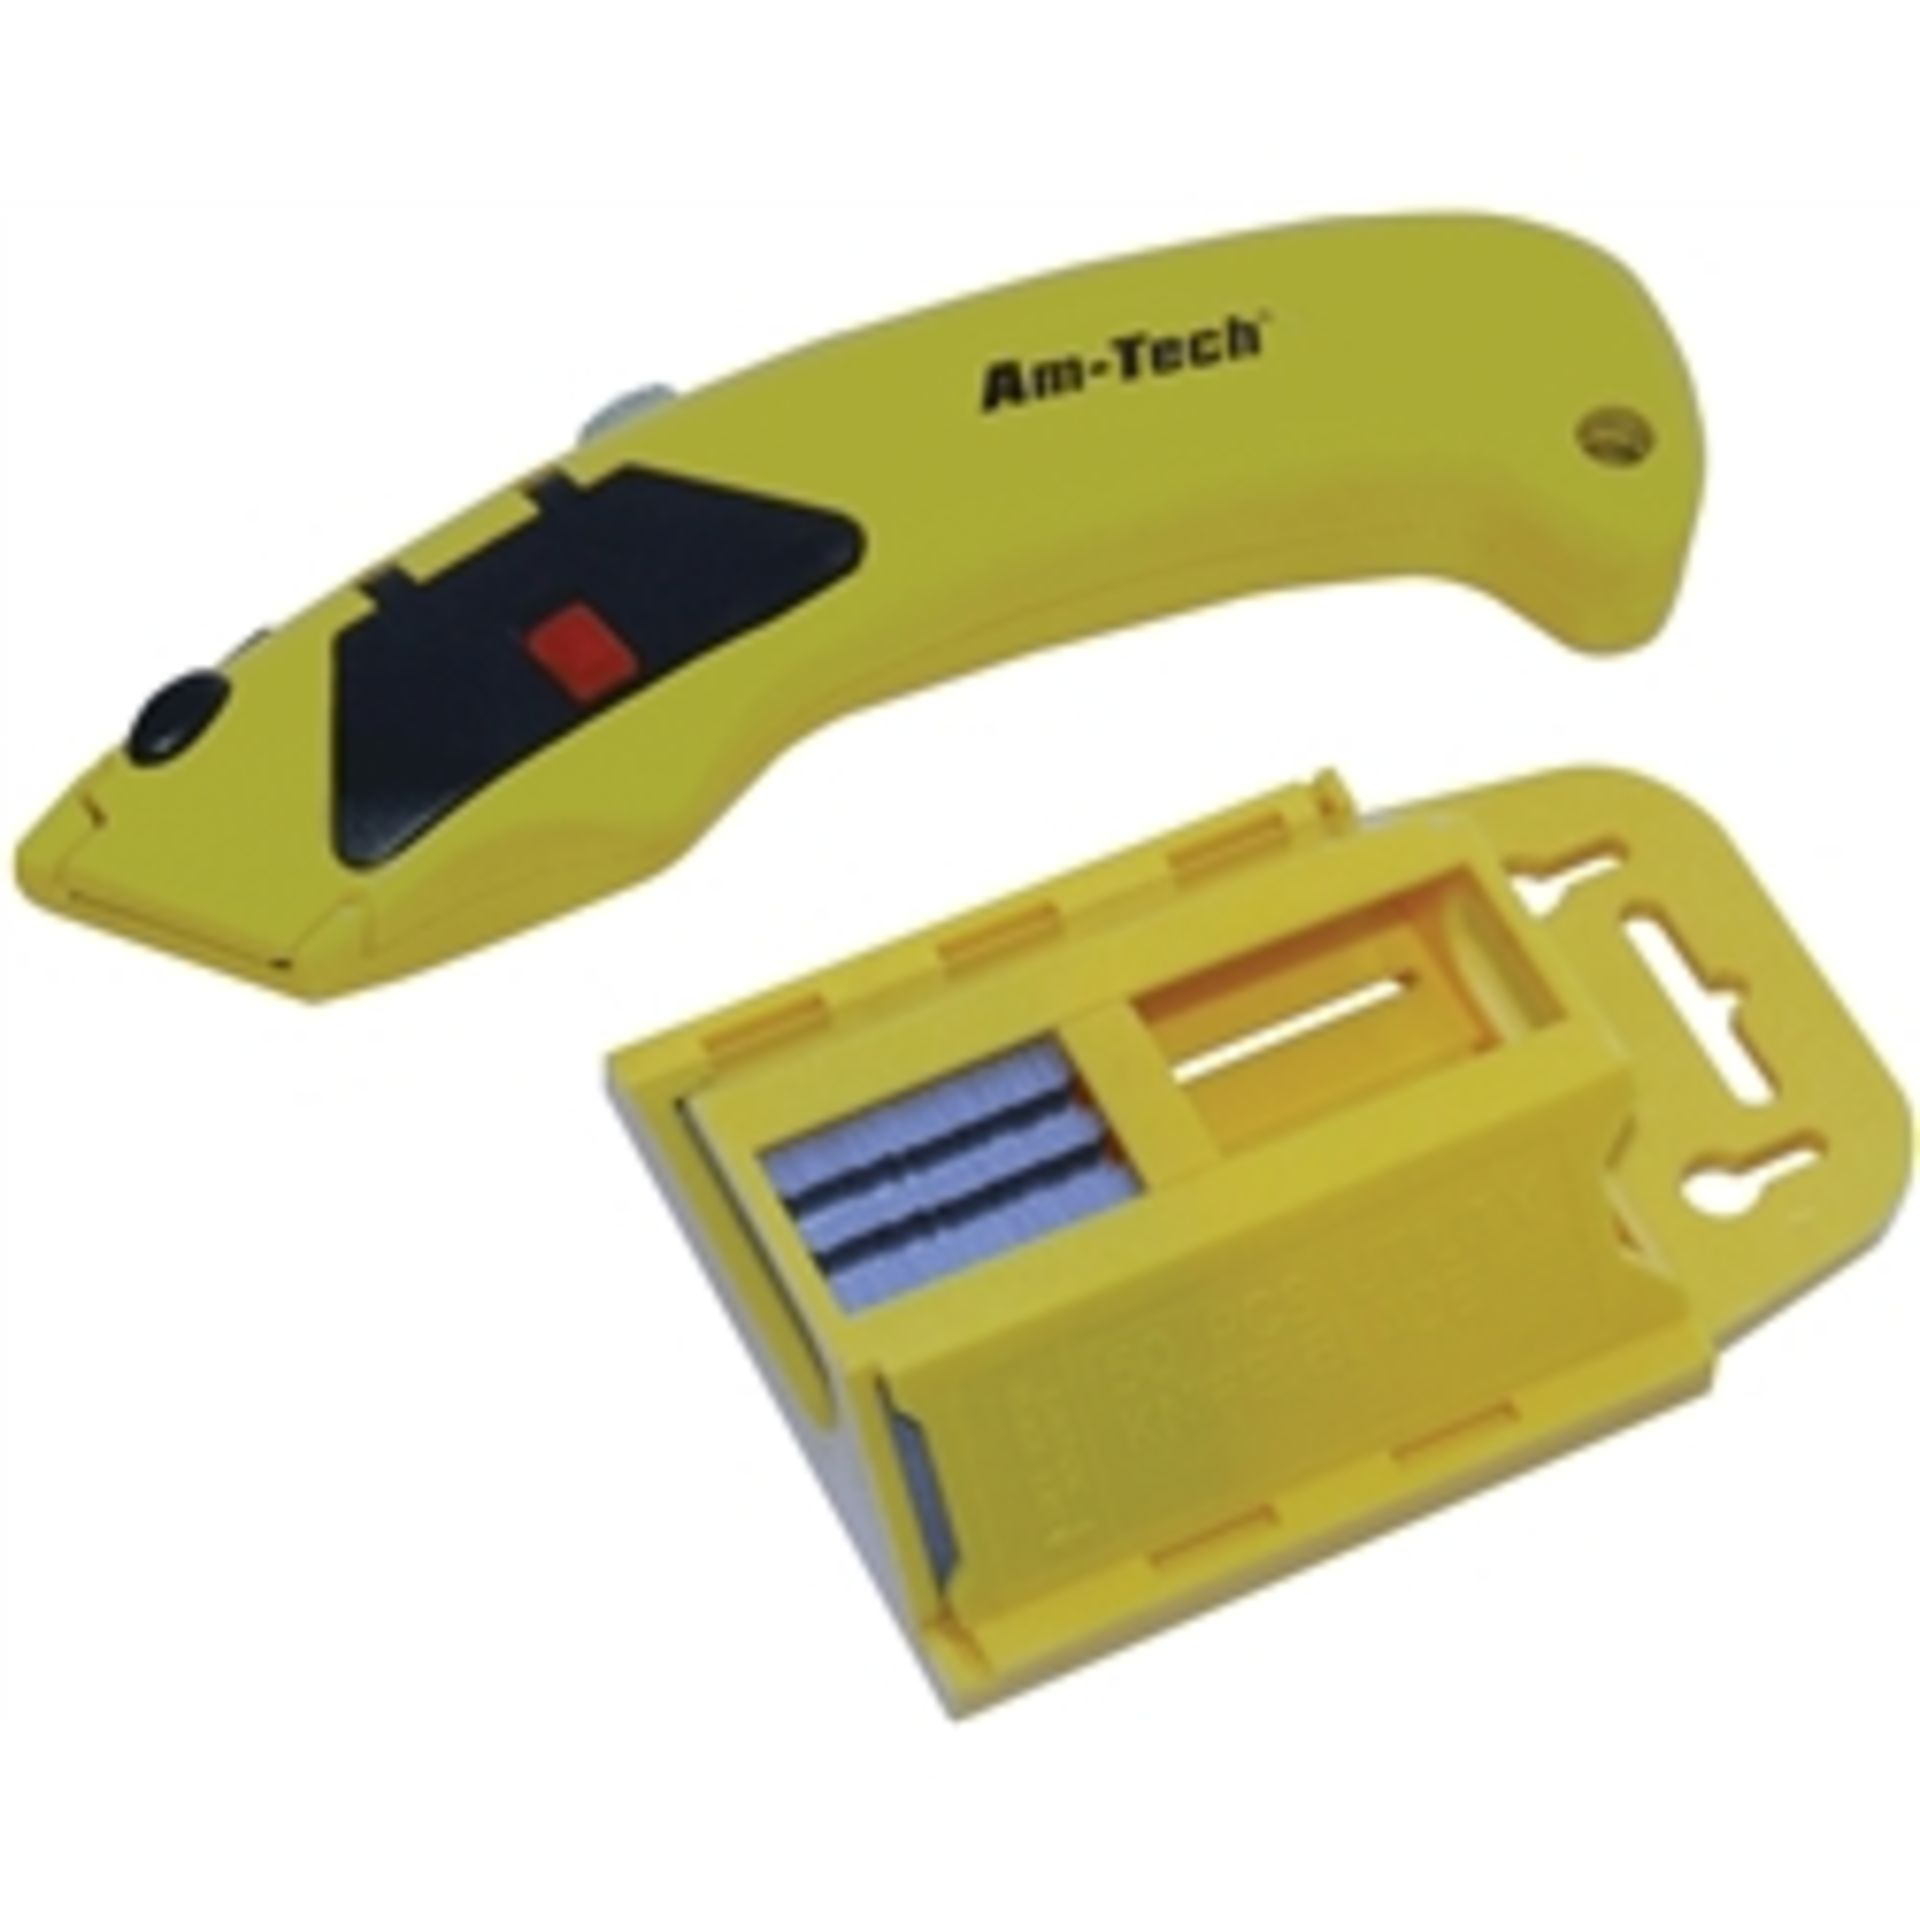 V *TRADE QTY* Brand New Auto Loading Utility Knife With 50pce Blade Dispenser X 4 YOUR BID PRICE - Image 2 of 2